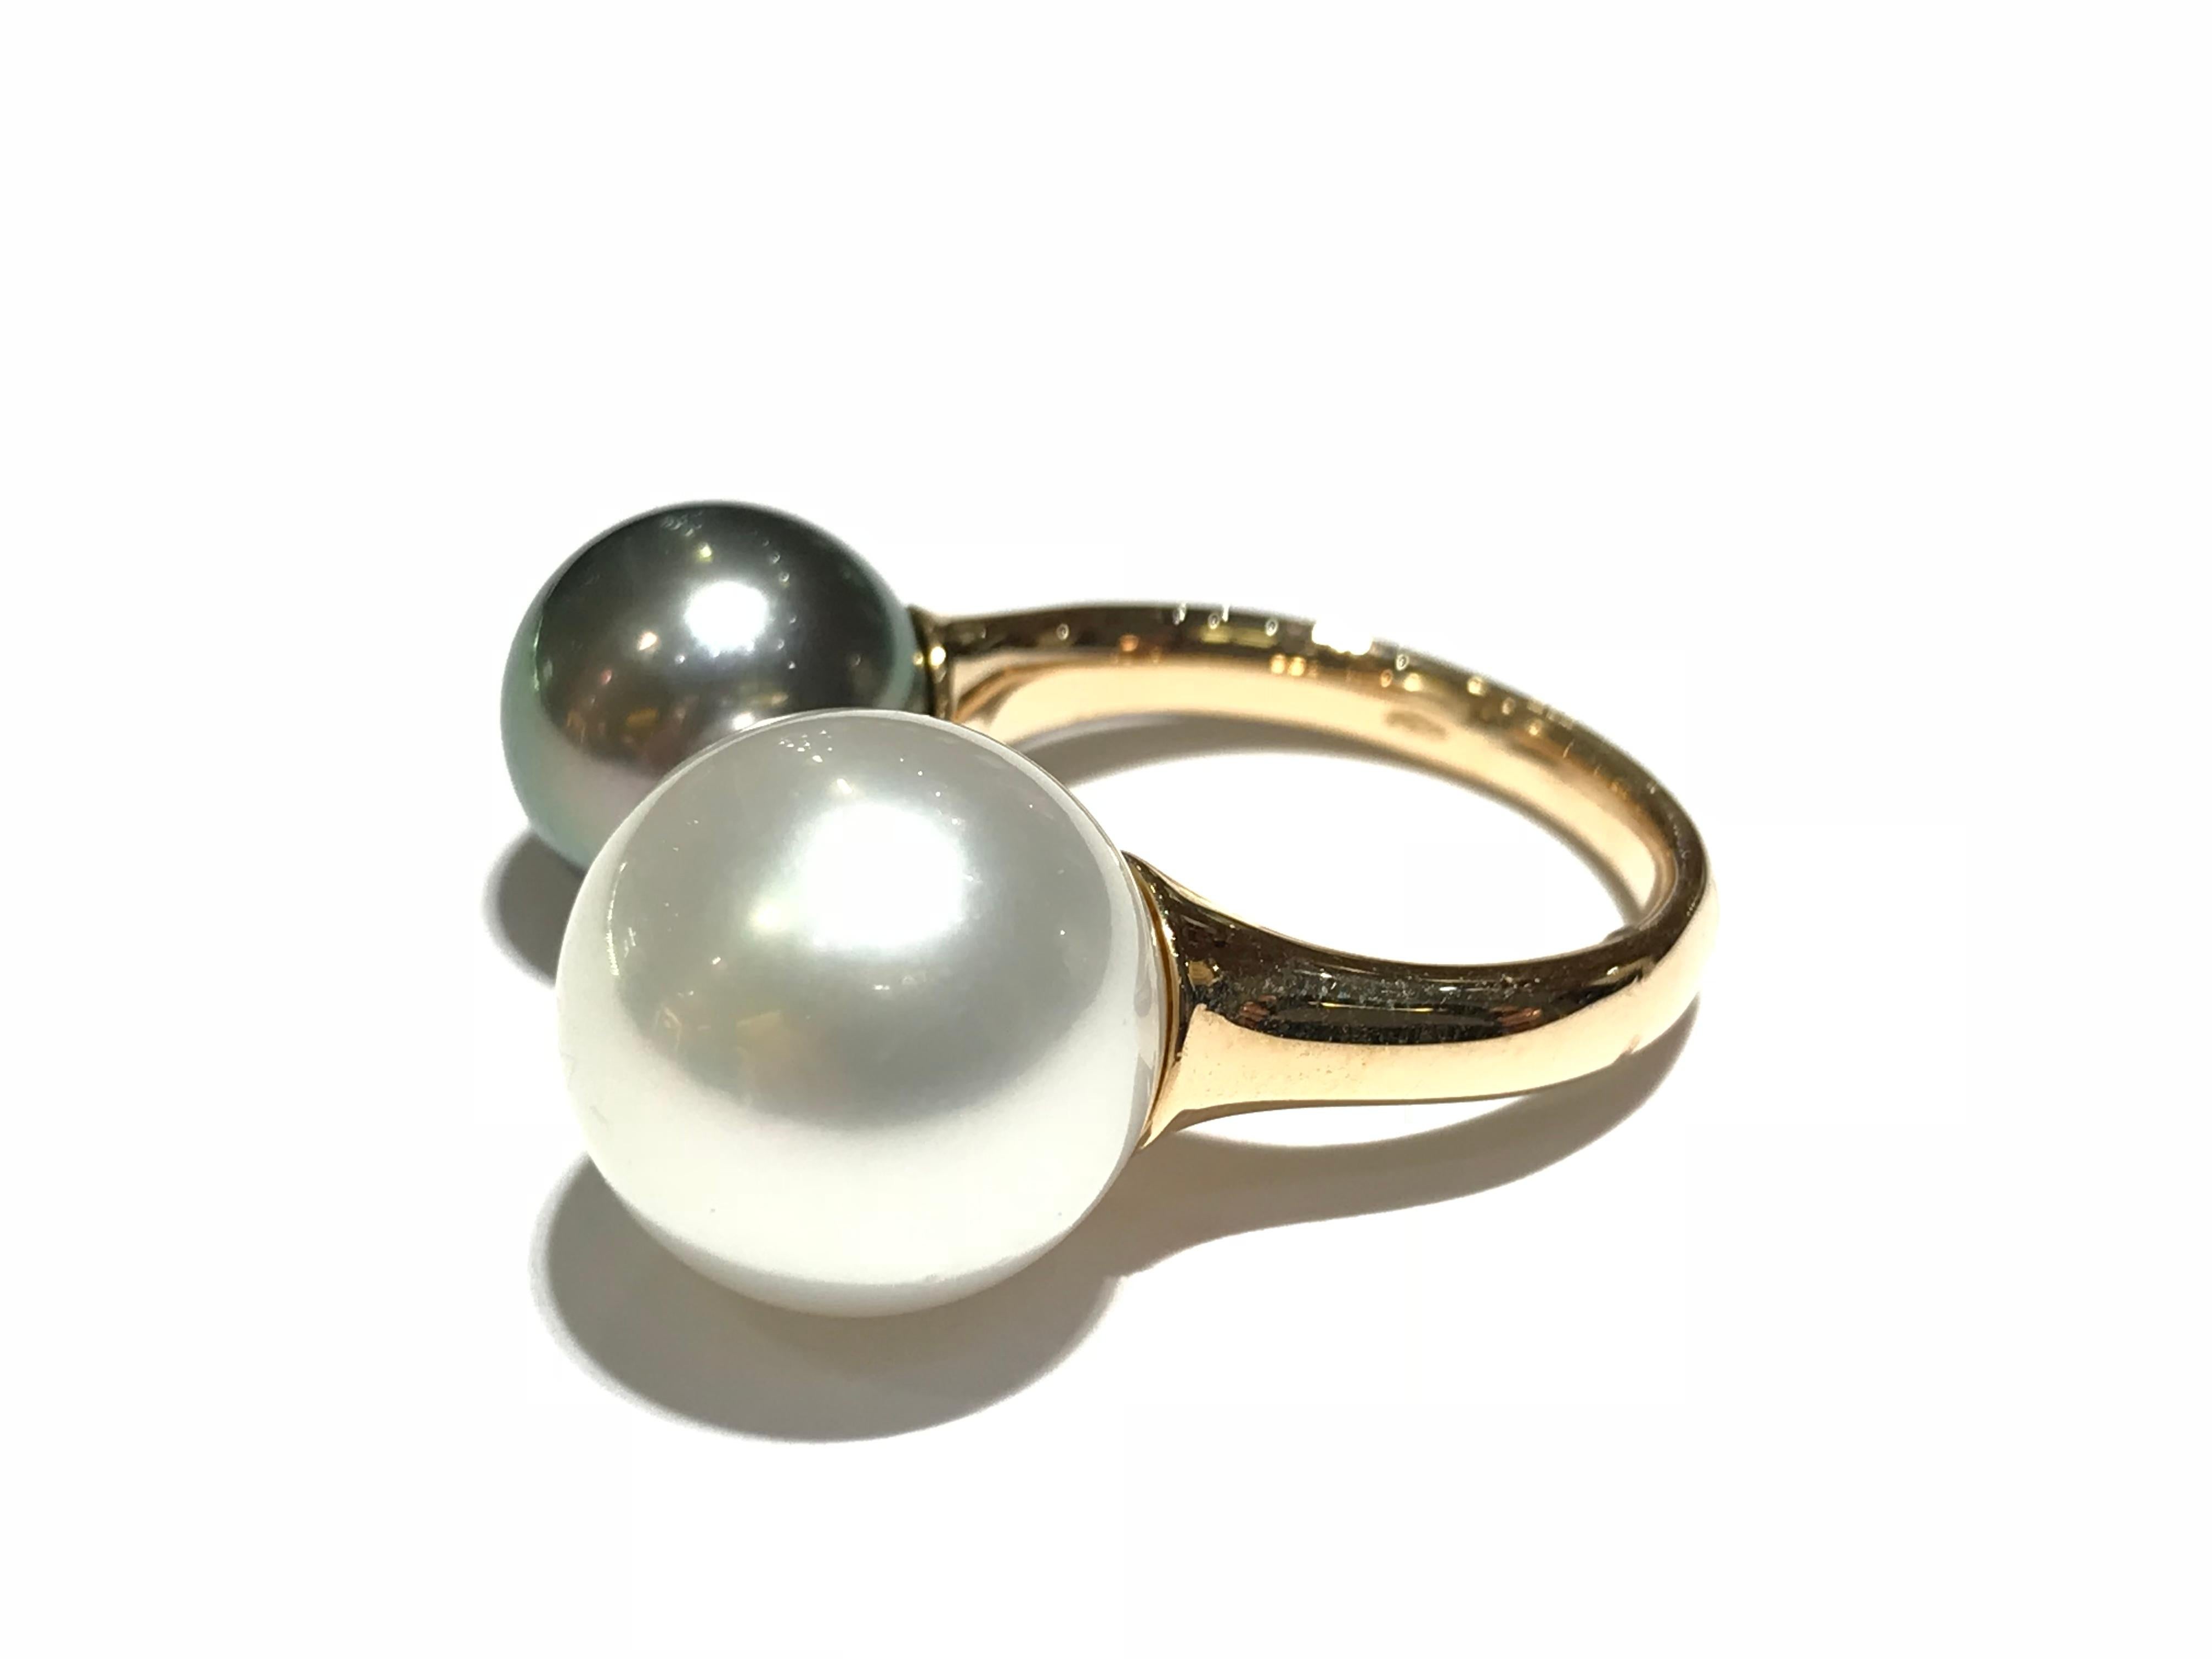 CRIVELLI italian made 18 karat rose gold Ring with South Sea pearl and Tahitian 
13 mm South Sea pearl 
11 mm Tahitian Pearl 
Italian made 
18 karat rose gold
